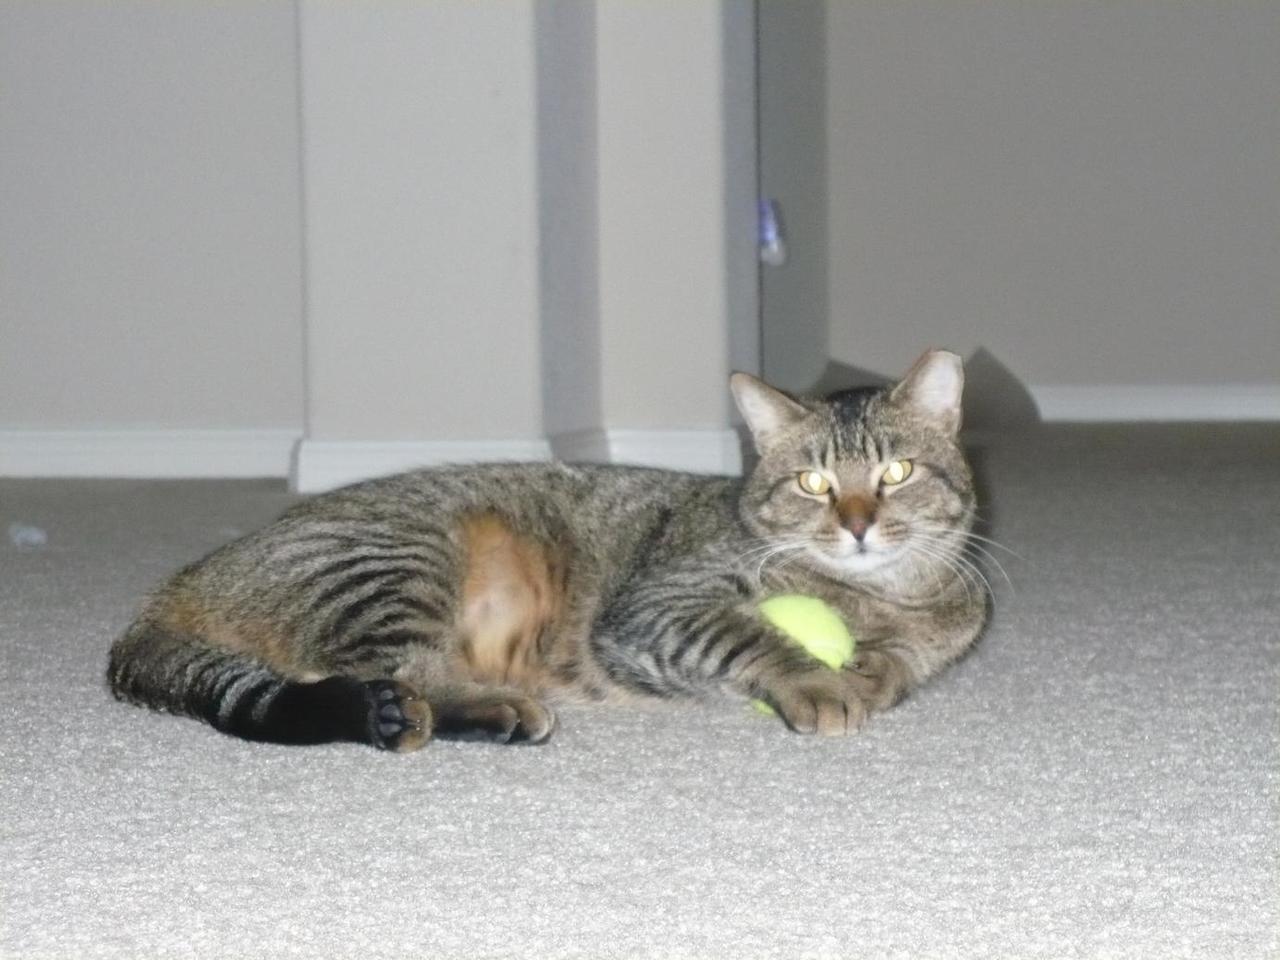 picture of our cat holding a tennis ball
